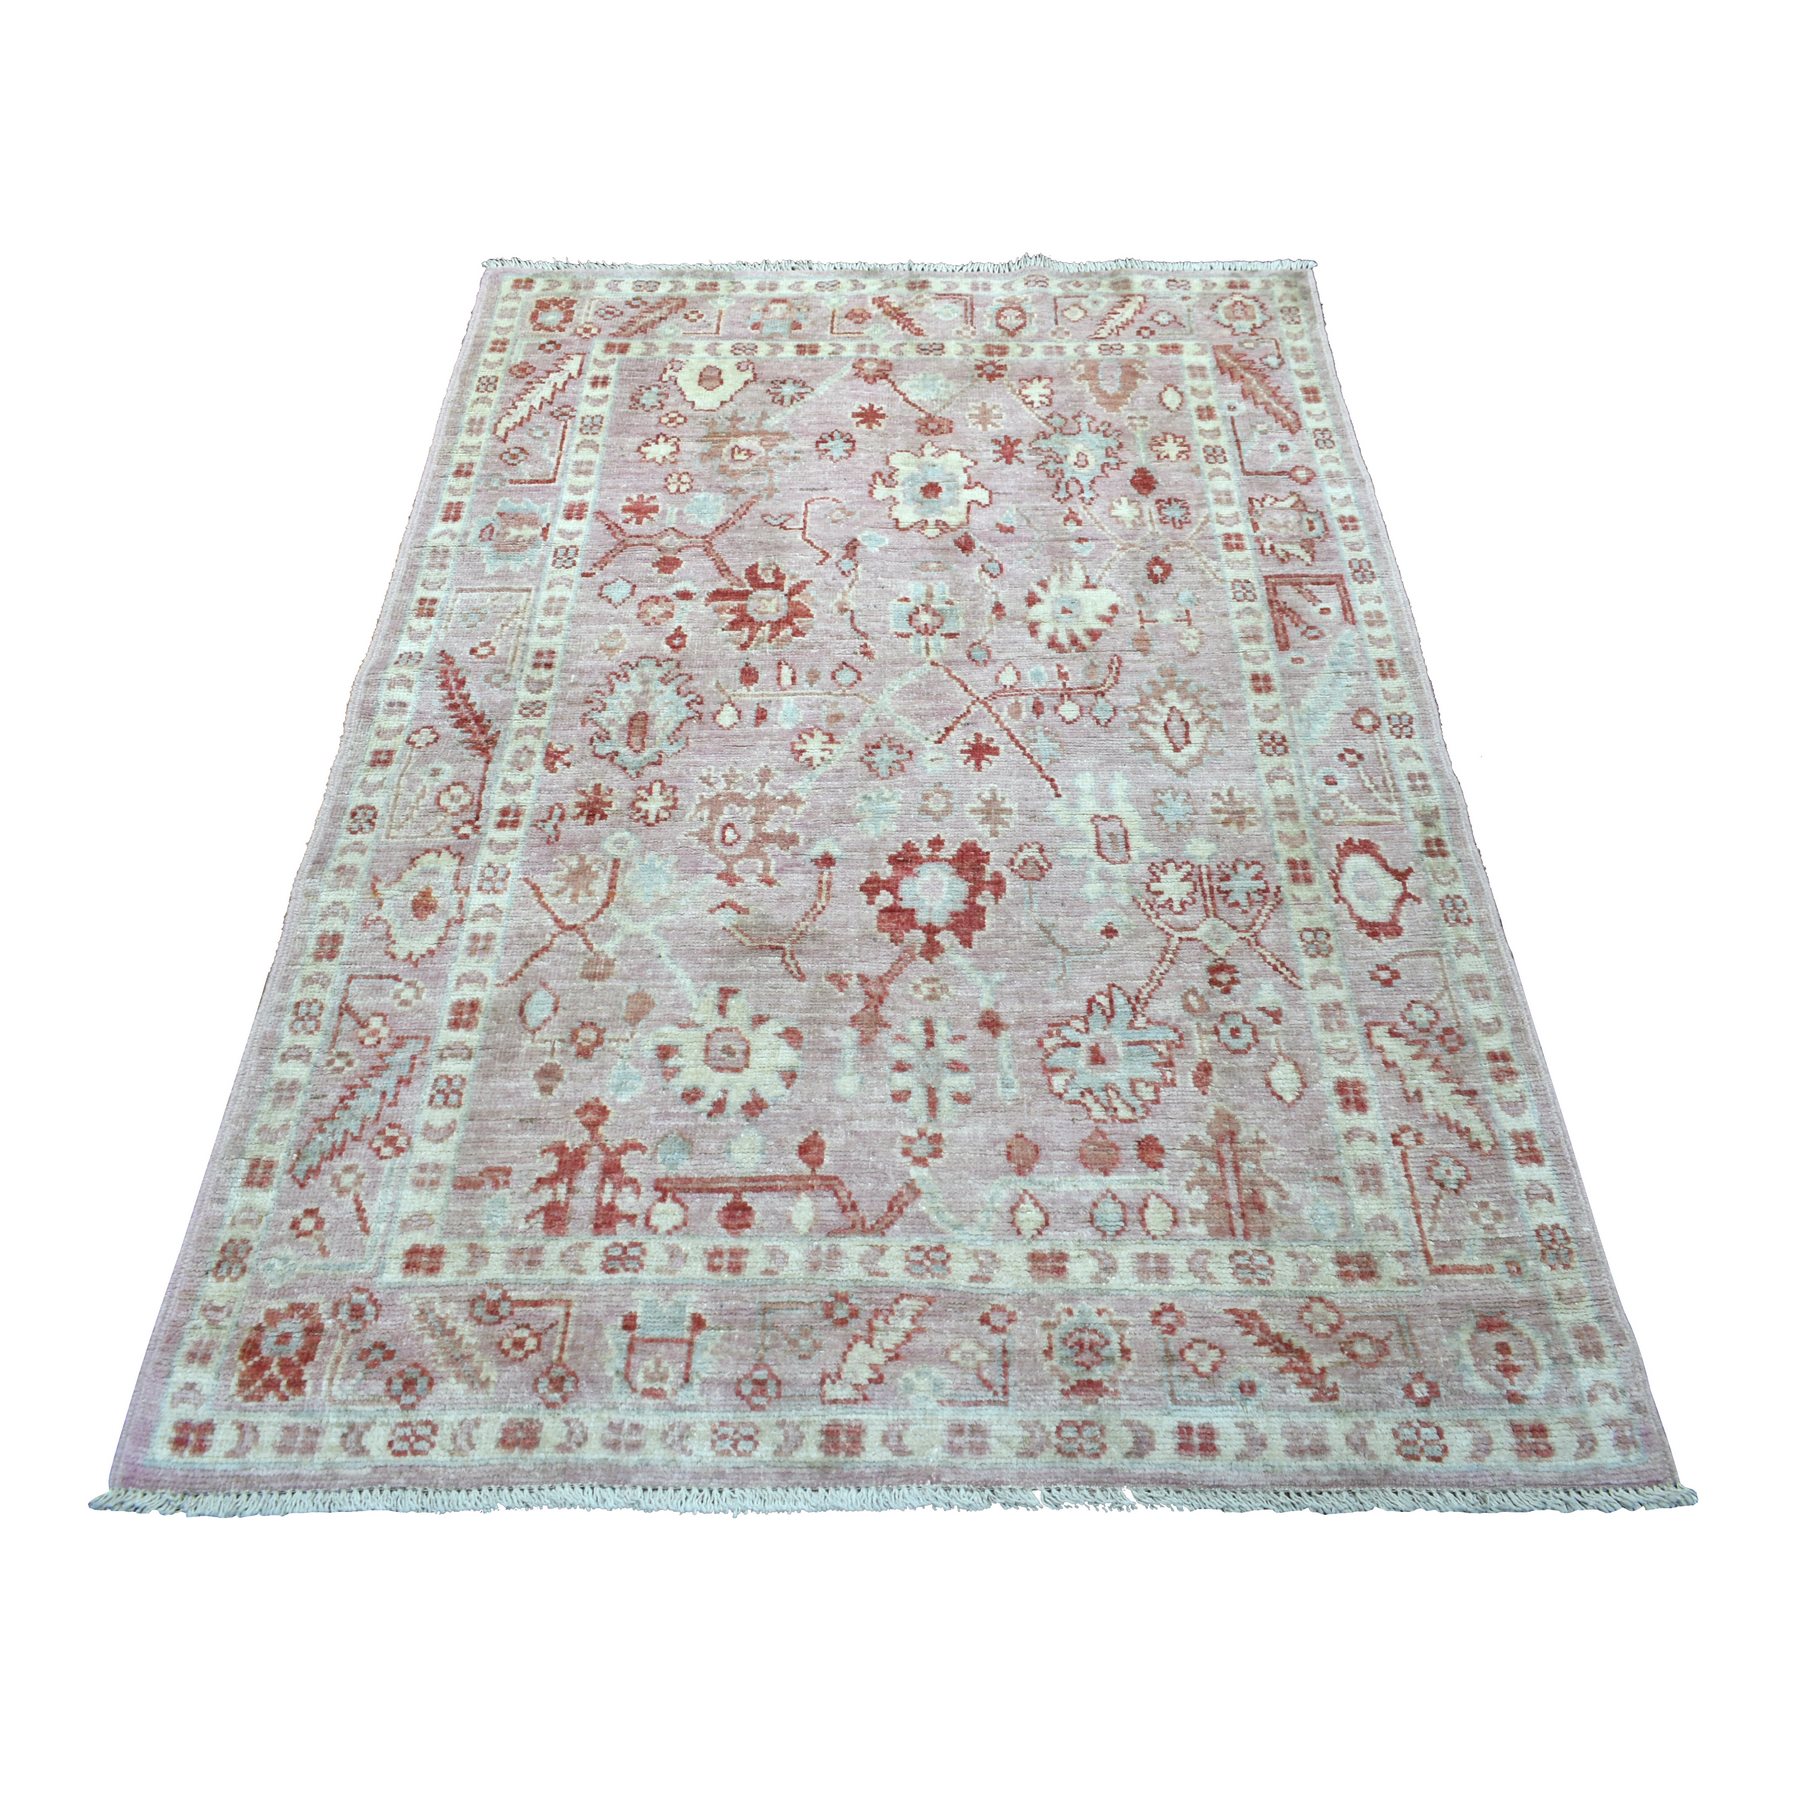 4'1"x5'10" Coral Pink Afghan Angora Oushak with Eye Catching Bold Floral Pattern Hand Woven Pure Wool Oriental Rug 